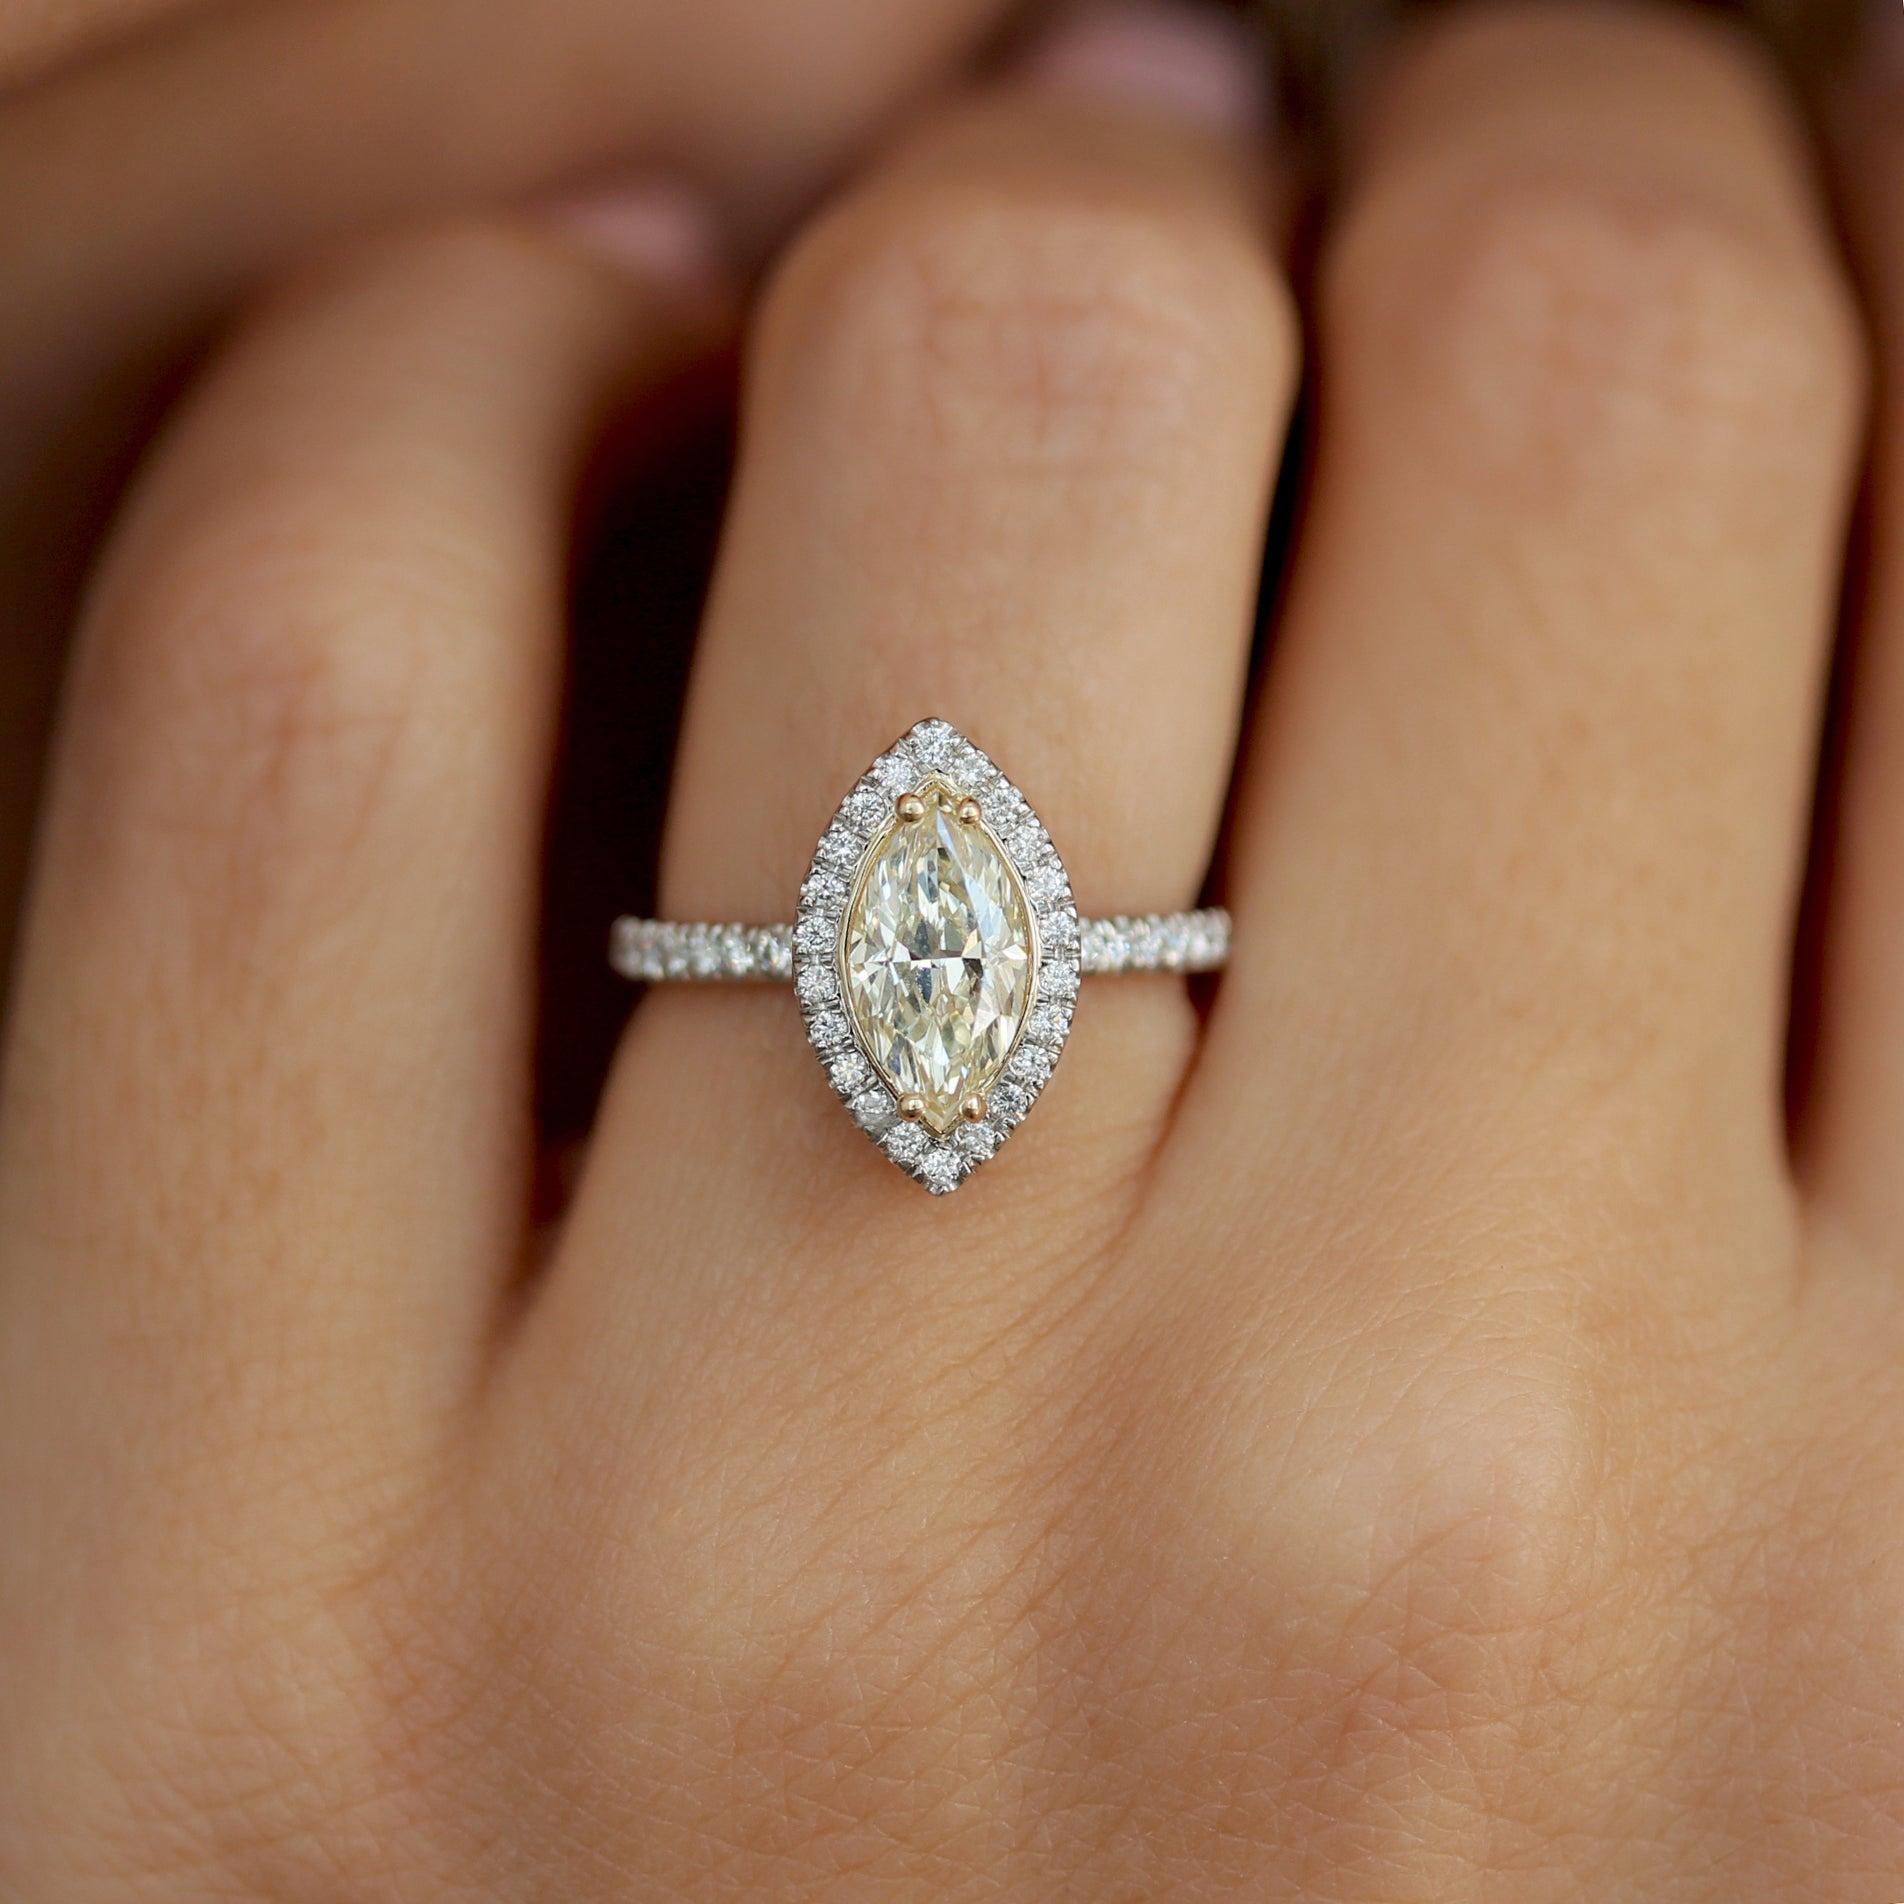 Marquise Yellow Halo Diamond Engagement ring - Daisy.
This list is for the engagement ring only.
Handmade with care. 
An original design by Silly Shiny Diamonds. 

Details: 
* Center Stone Shape: Marquise cut.
* Center Stone Type: Natural diamond,